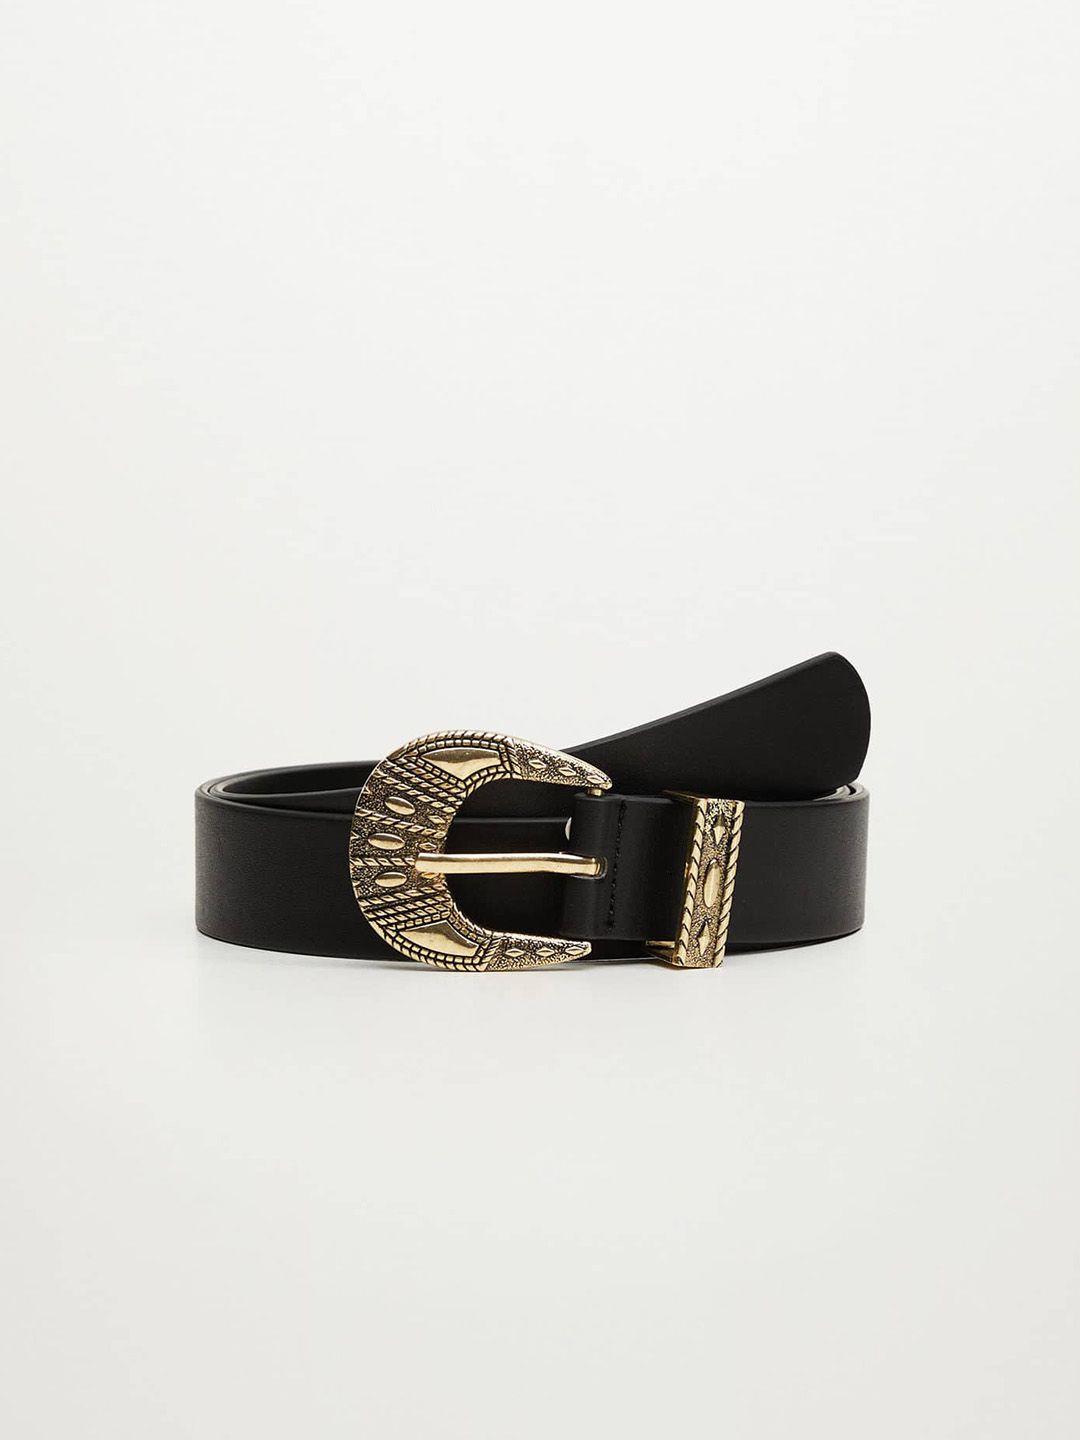 MANGO Women Black Solid Belt with Embossed Buckle Price in India